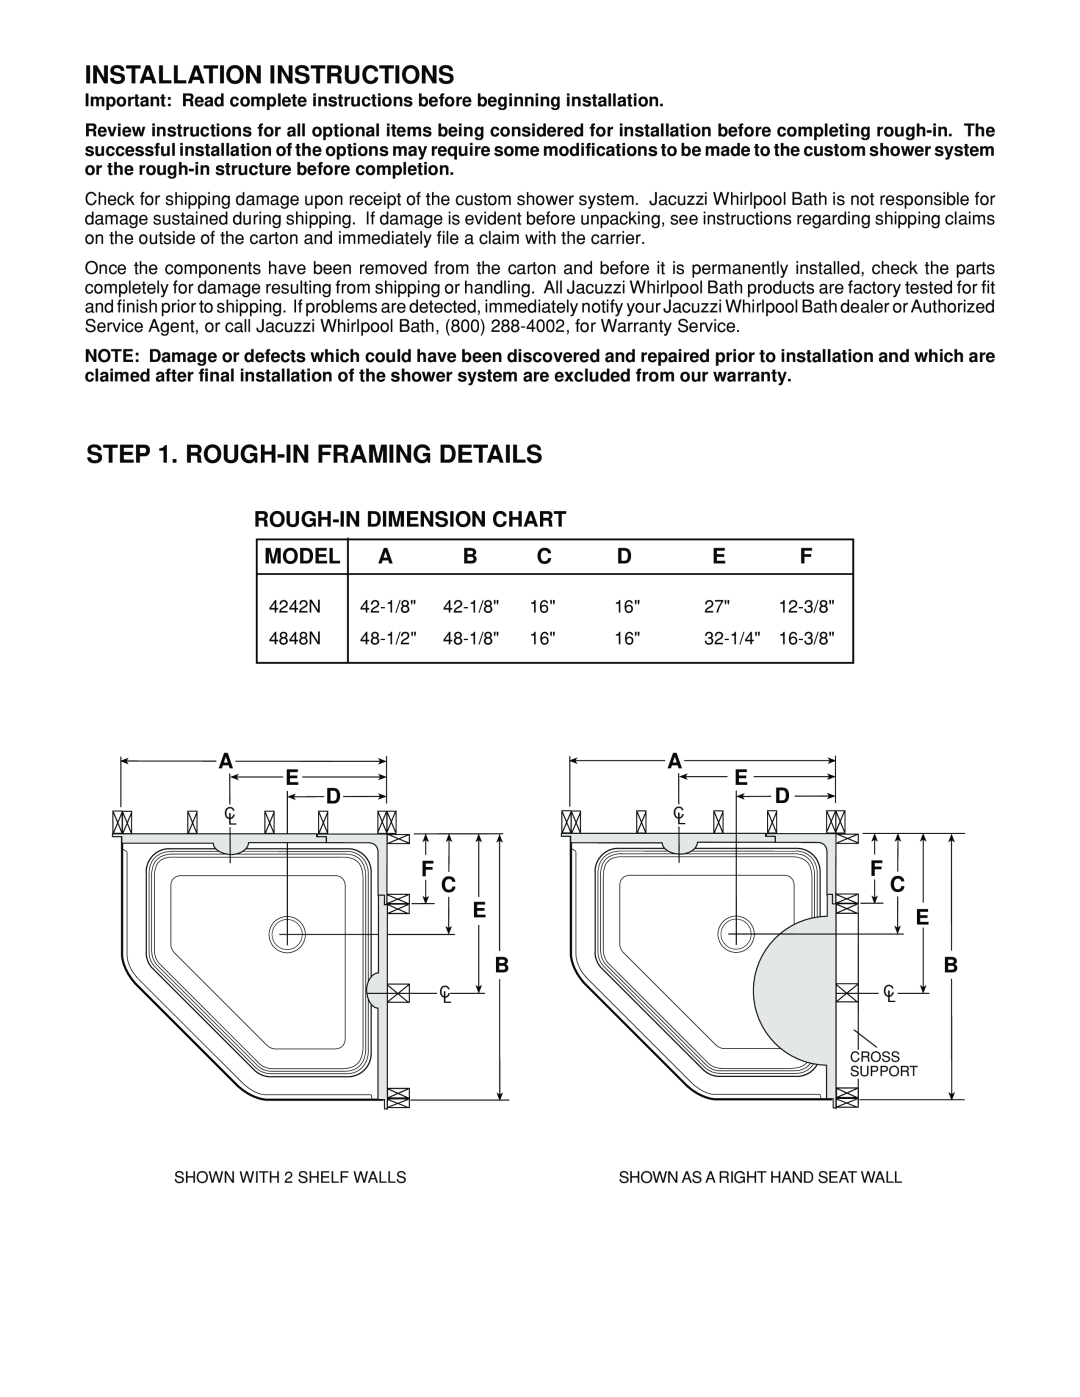 Jacuzzi Neo Angle Shower System Installation Instructions, Rough-In Framing Details, Rough-In Dimension Chart, Model 